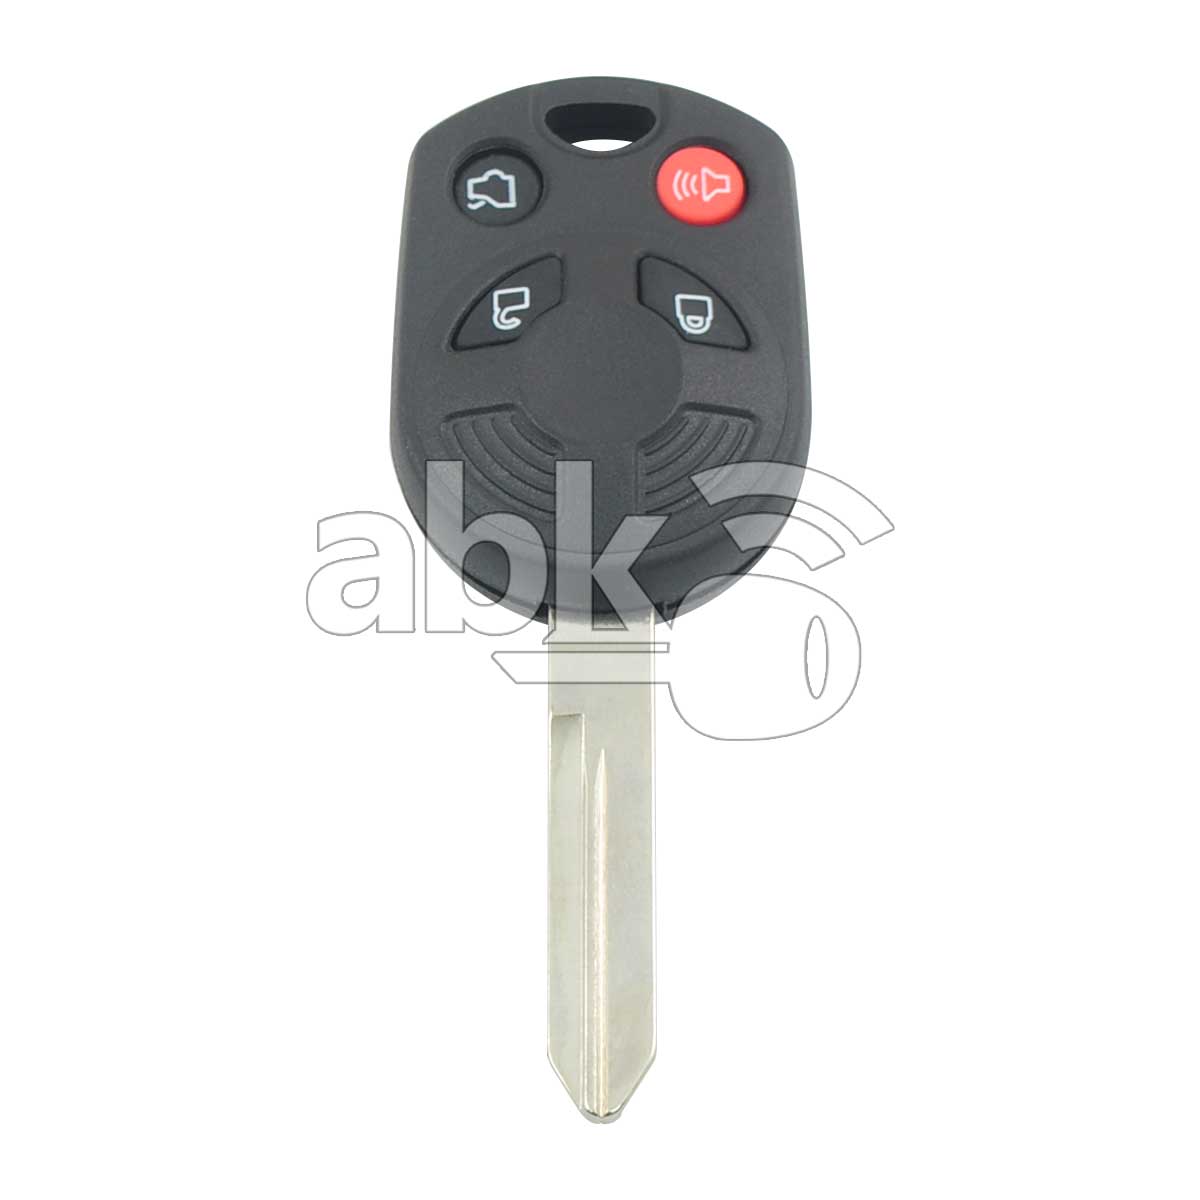 Genuine Ford Edge Expedition Explorer Mustang 2007+ Key Head Remote 4Buttons OUCD6000022 315MHz 